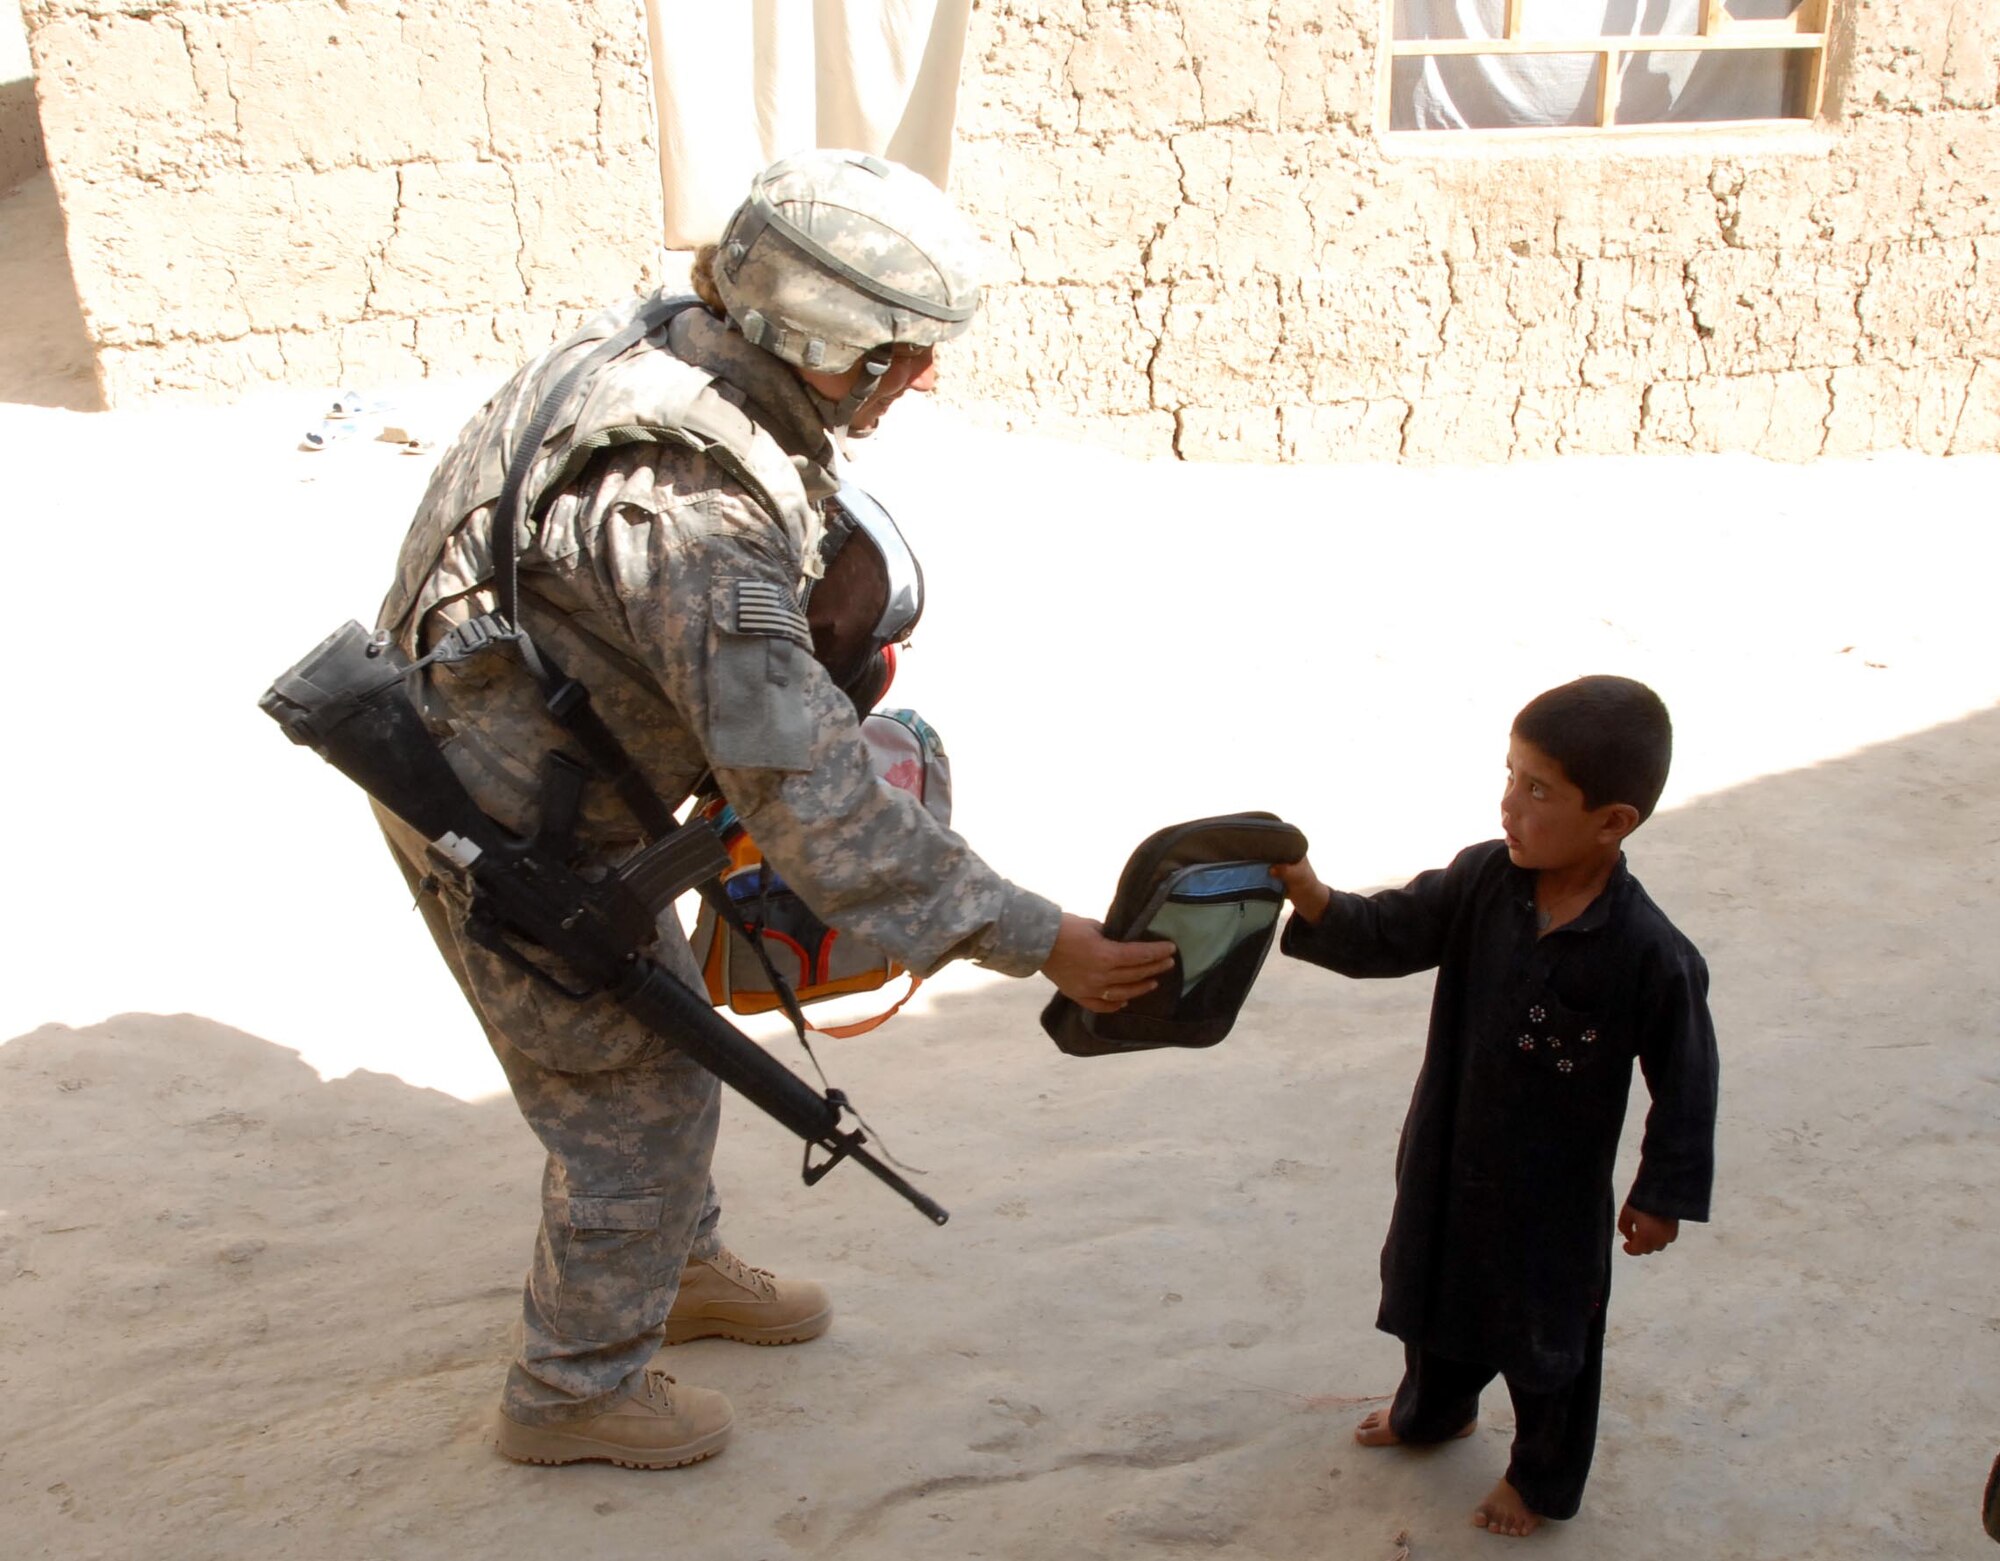 LOGAR PROVINCE, Afghanistan - Tech. Sgt. Michelle Stokes, counter improvised explosive device team, operating out of Forward Operating Base Shank distributes school supplies to children in the village of Polerad, Logar Province Afghanistan. (U.S. Army photo/Pfc. Melissa Stewart)